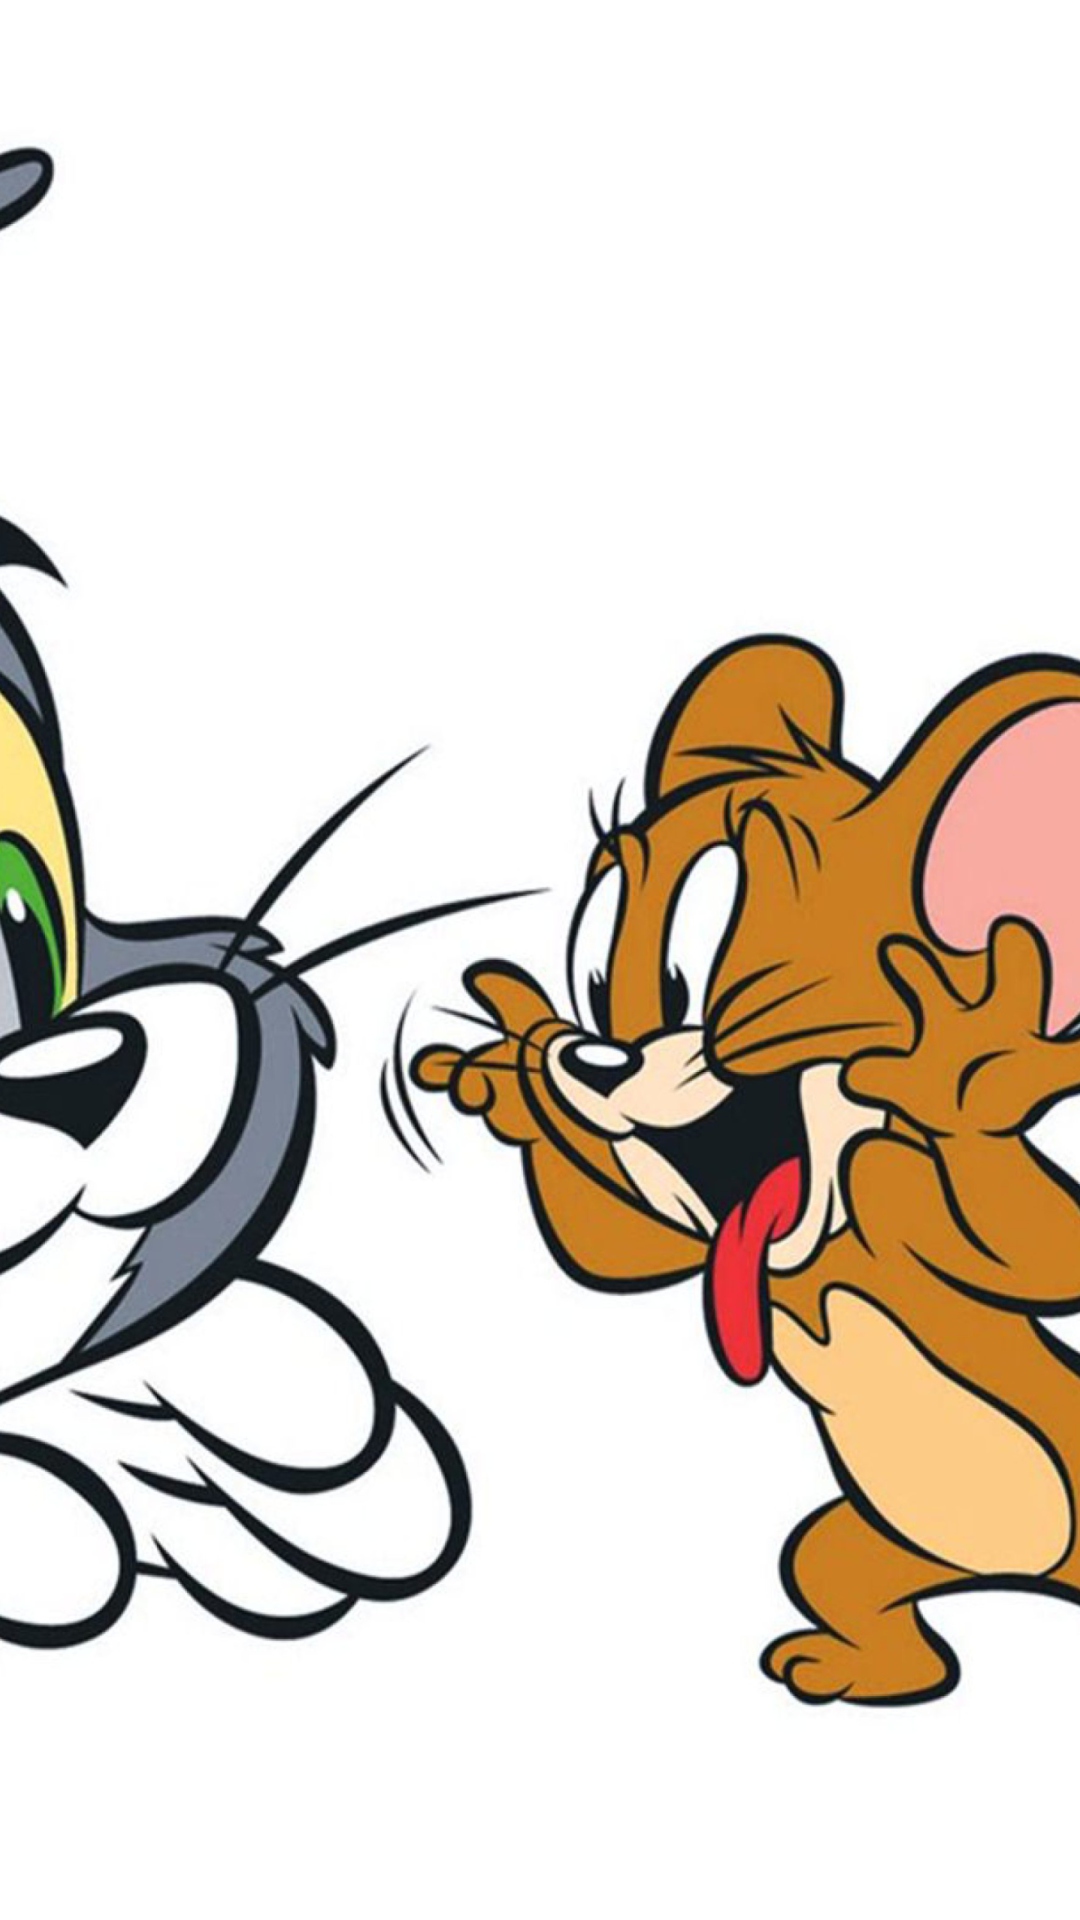 Tom And Jerry wallpaper 1080x1920